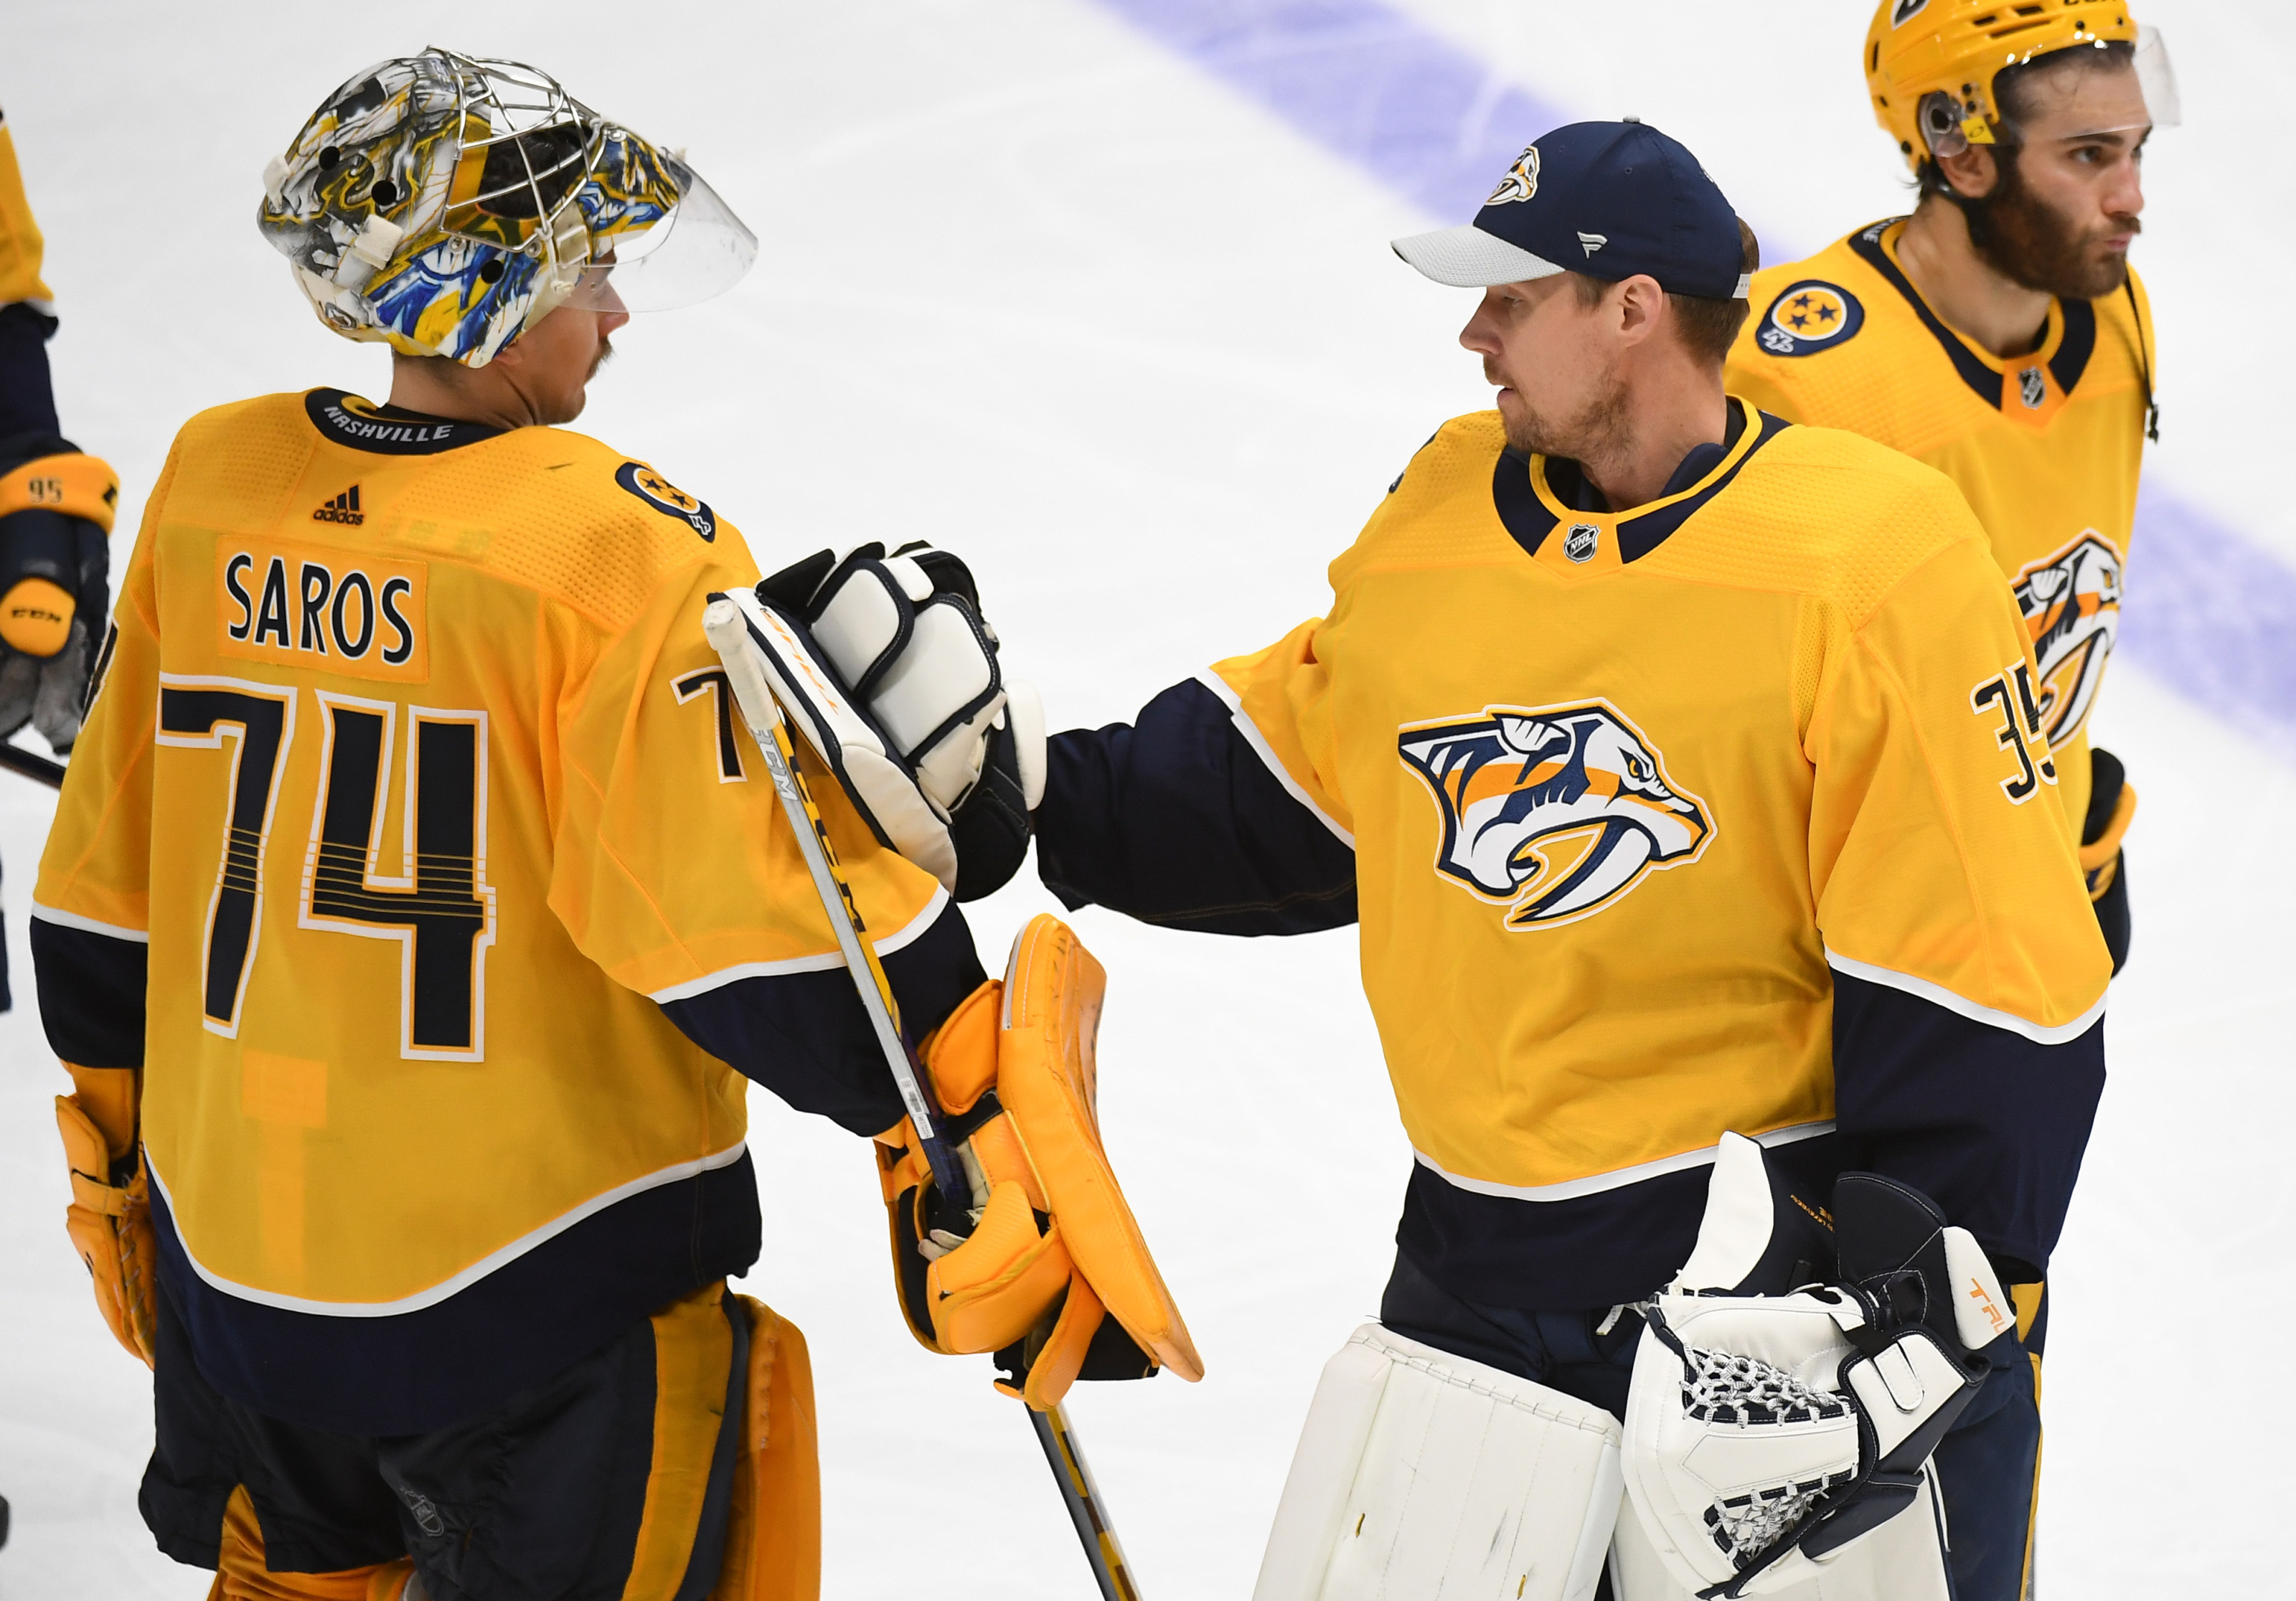 Saros figuring things out at right time for Predators